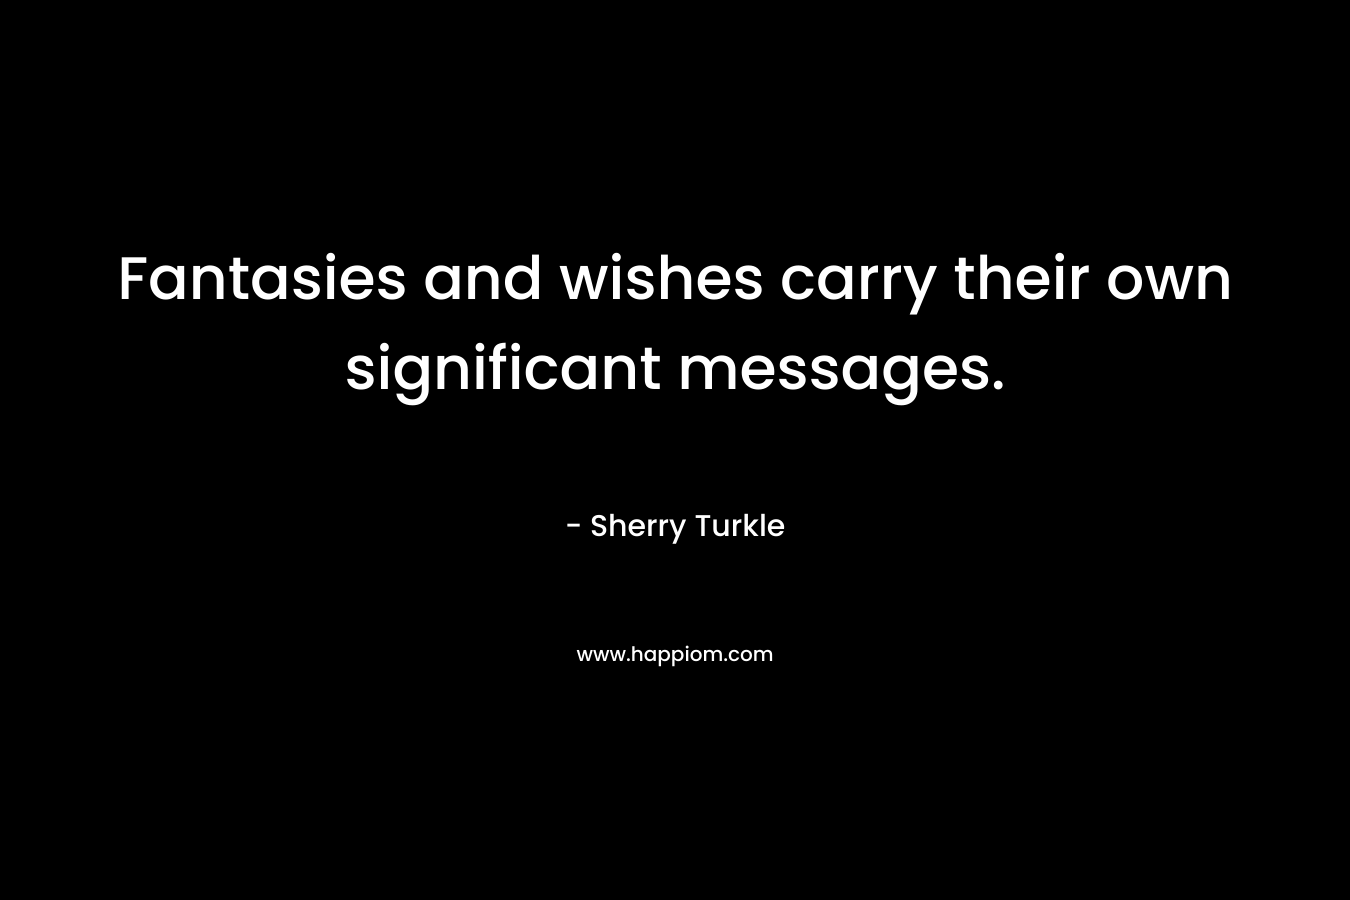 Fantasies and wishes carry their own significant messages. – Sherry Turkle